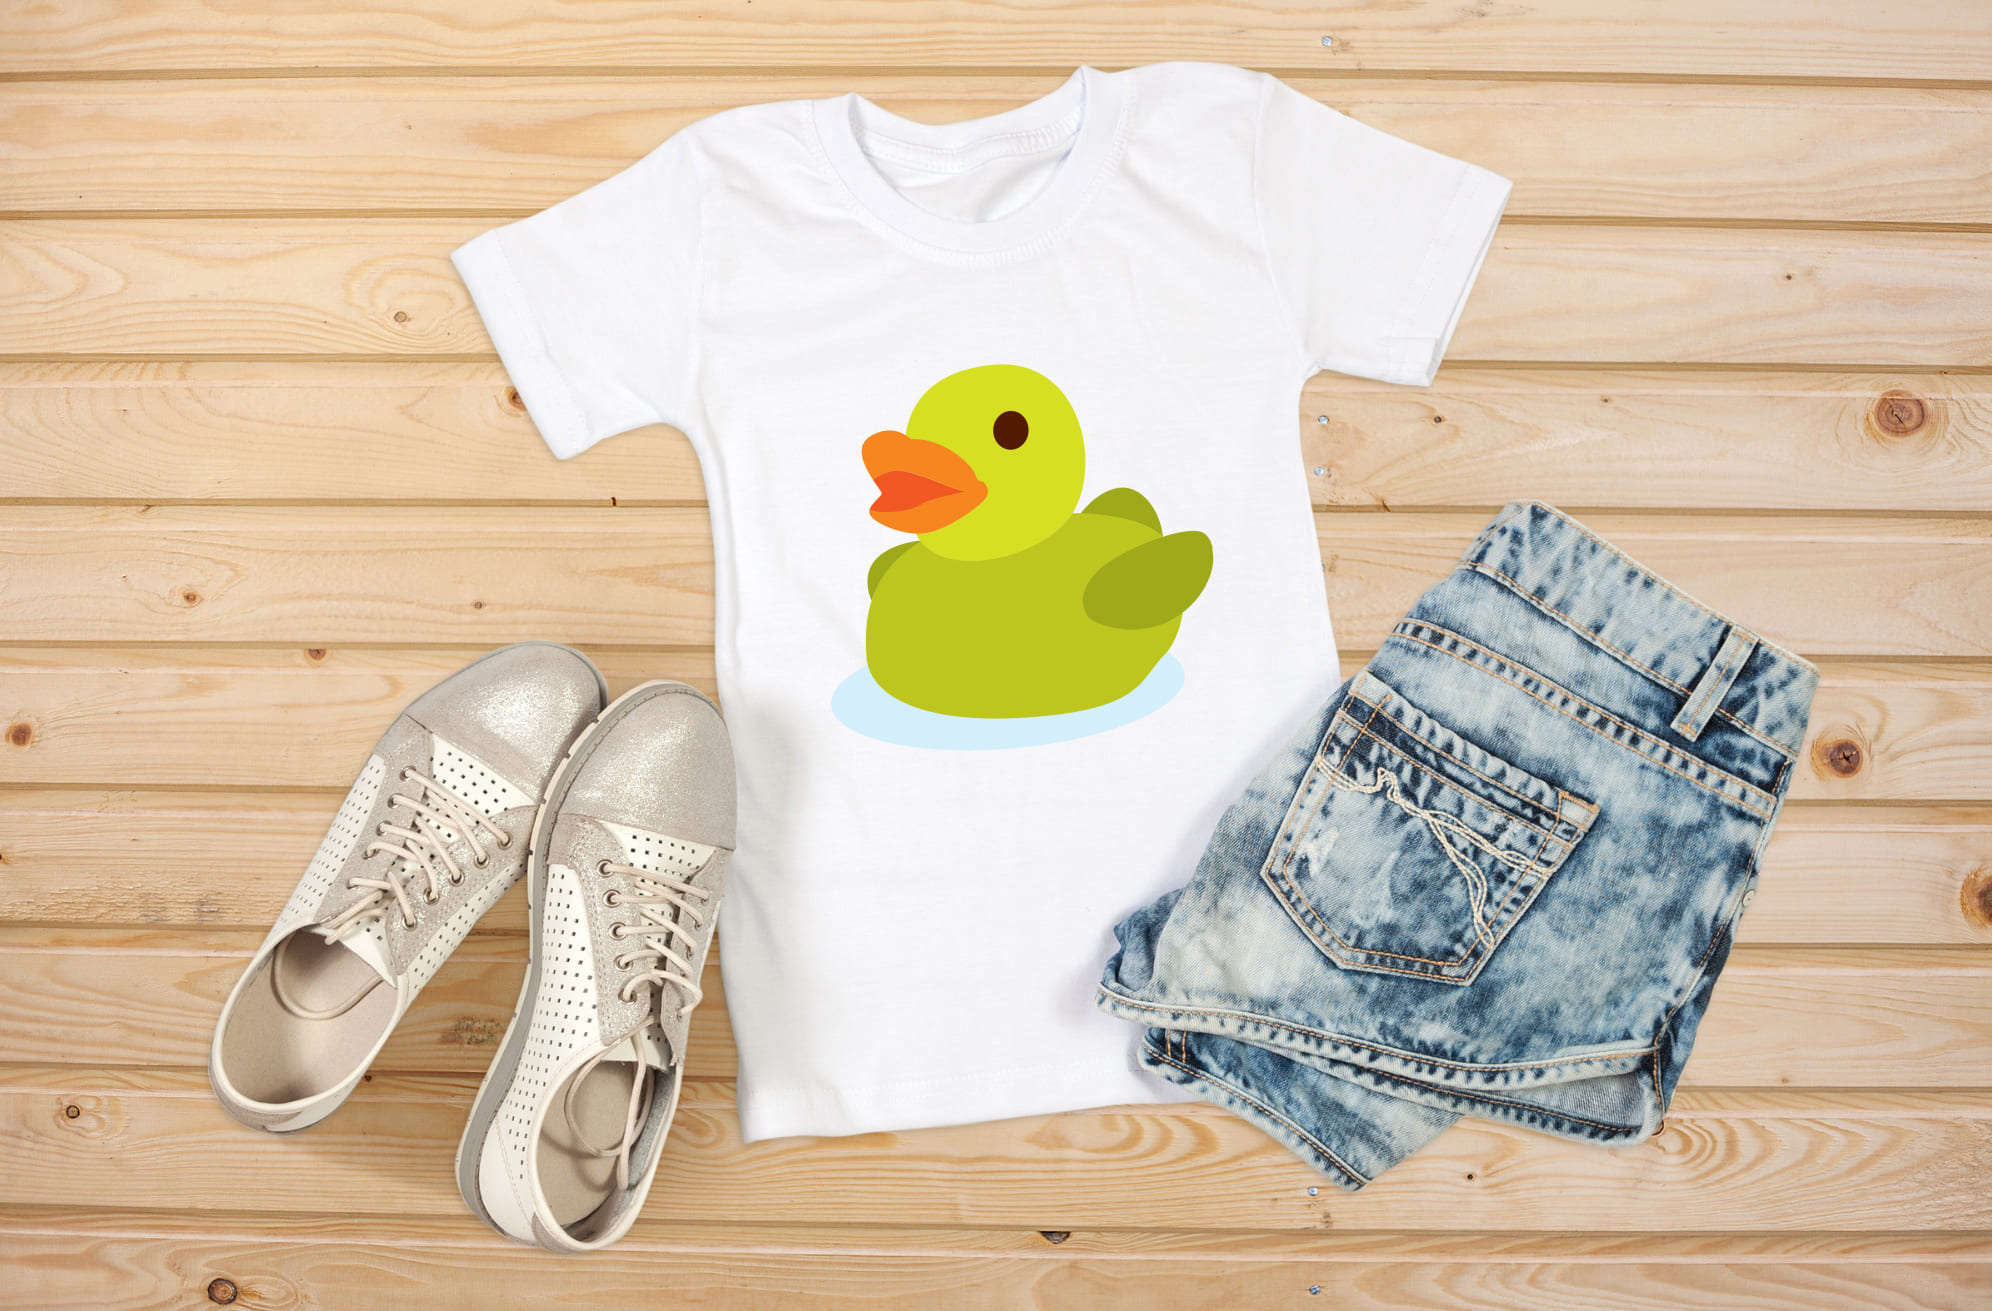 Image of a white T-shirt with an adorable rubber duck print in light green